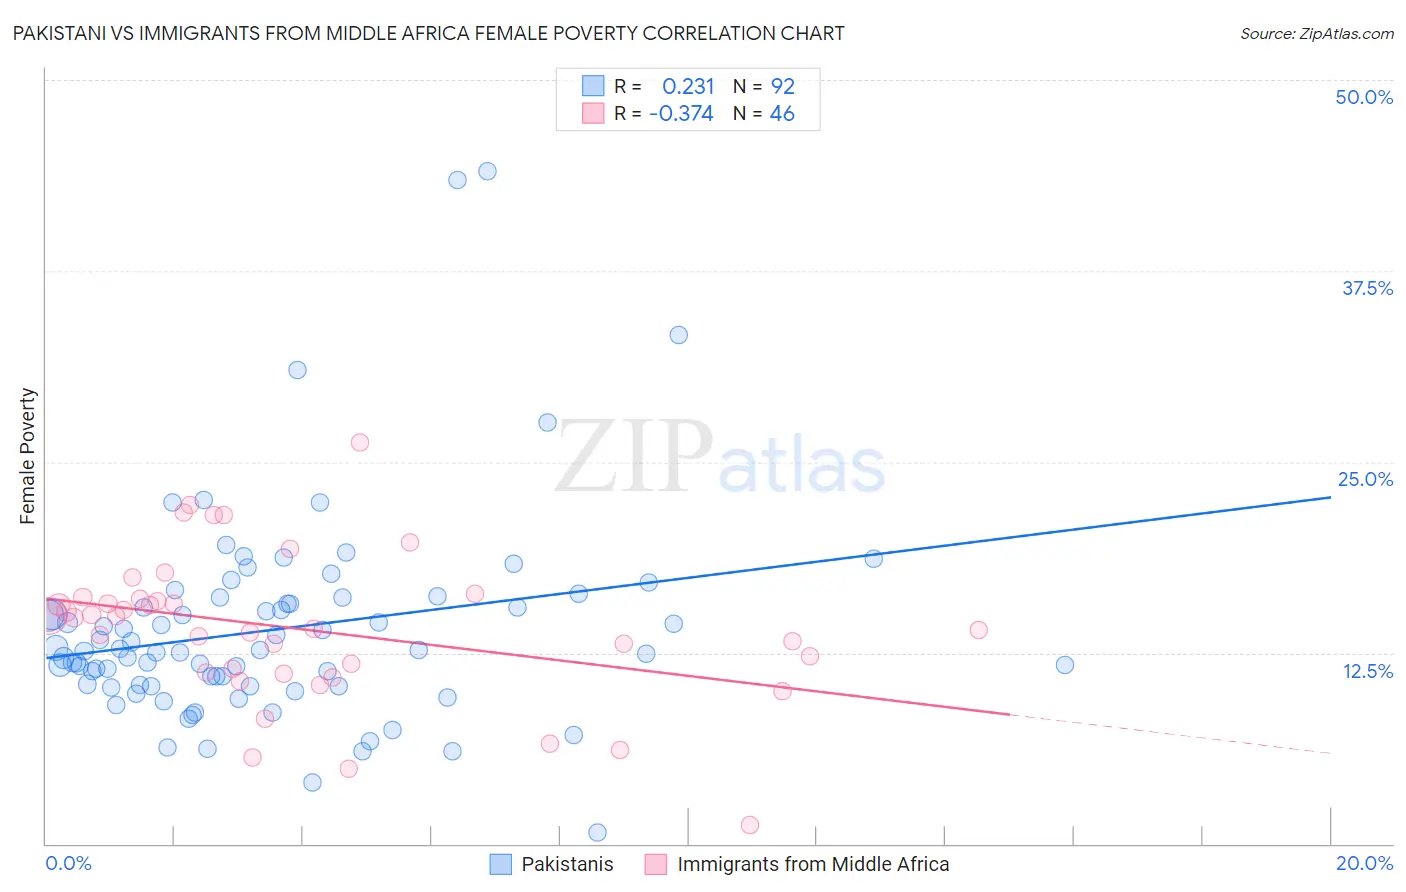 Pakistani vs Immigrants from Middle Africa Female Poverty